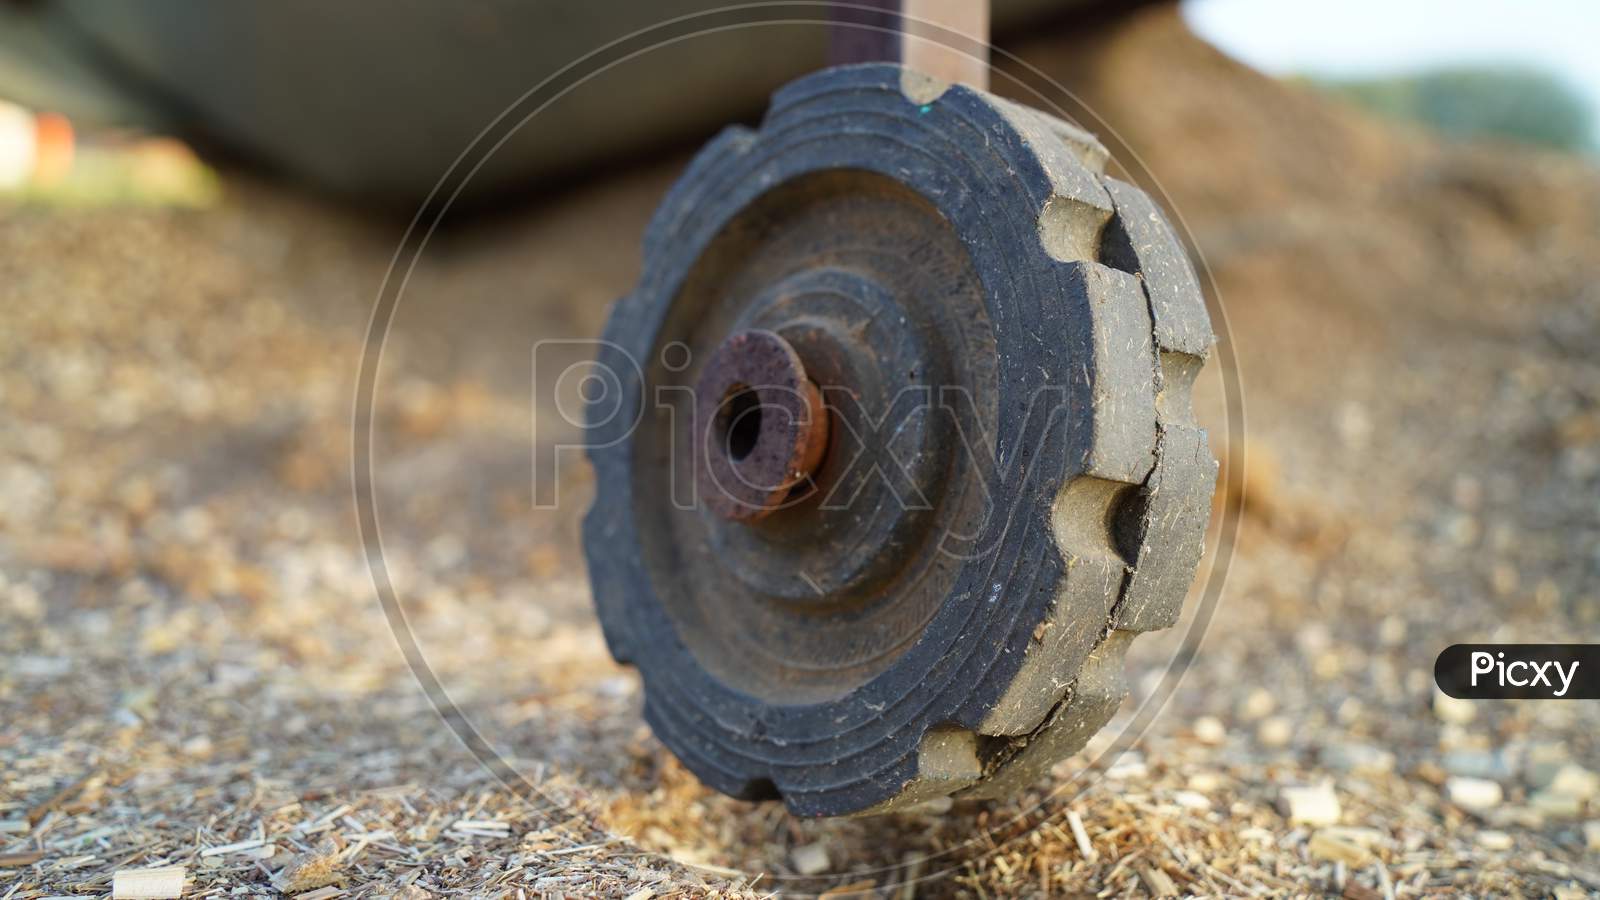 Old Rustic Wheel Of Fodder Harvesting And Cleaning Machine. Black Wheel Of Machine In Rustic Stage. Plastic Wheel Closeup.